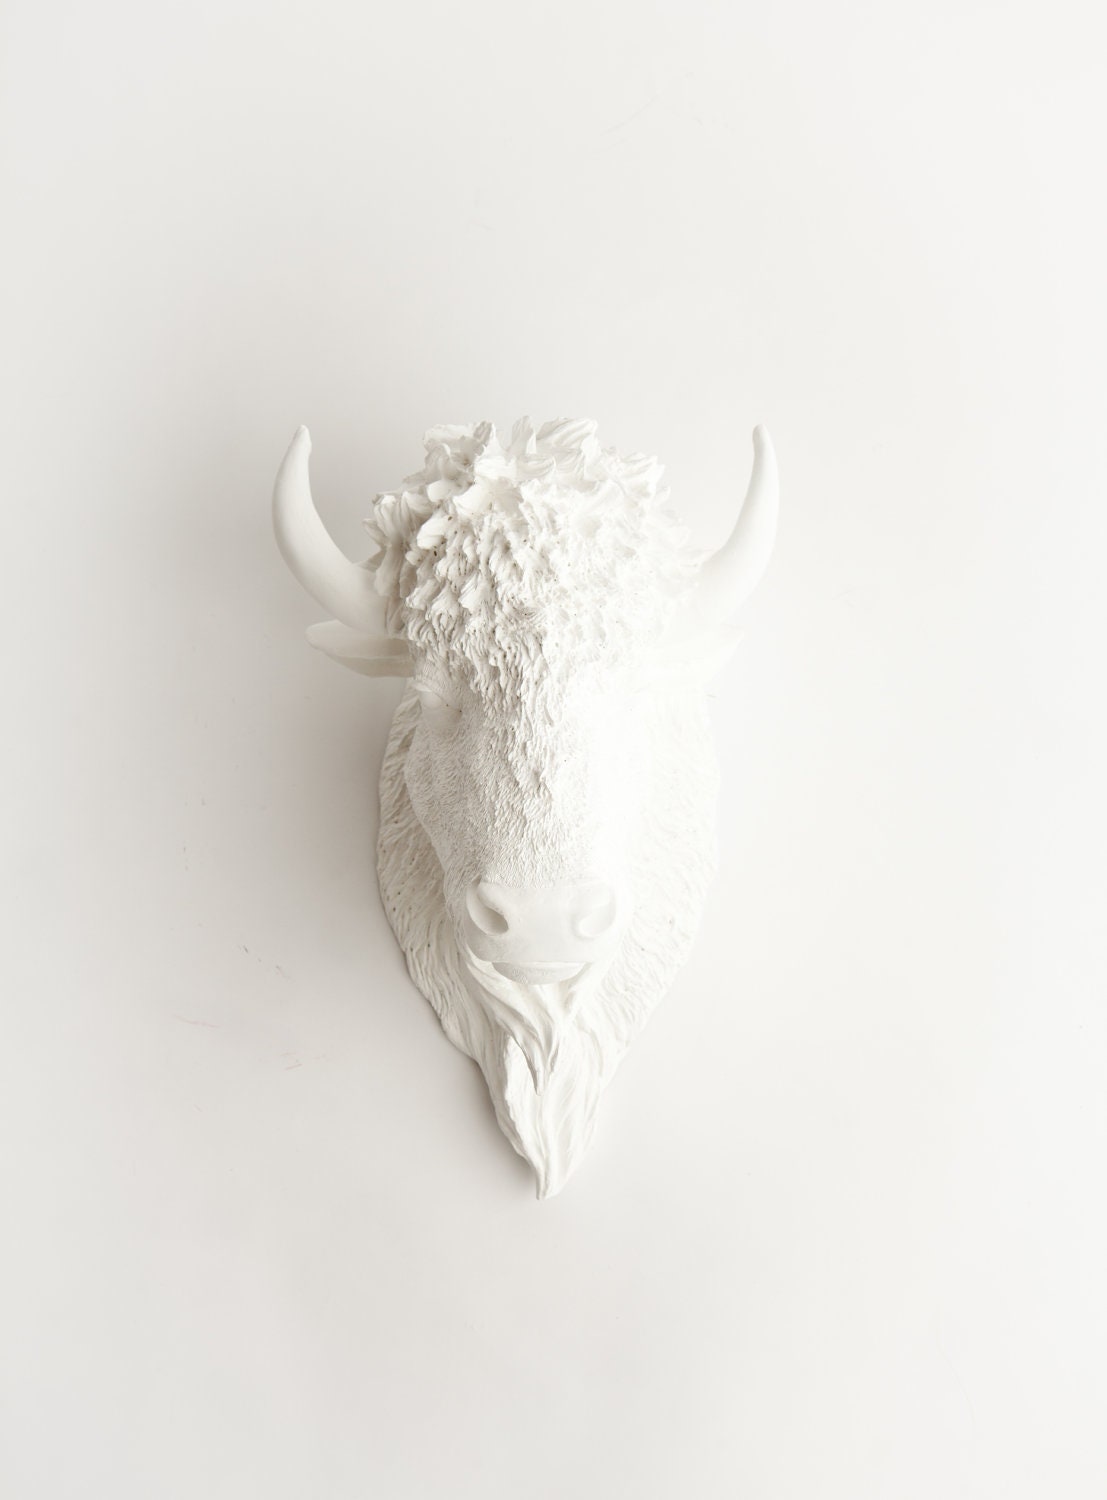 White Faux Taxidermy - The Mellby - White Resin Bison Head- Buffalo Resin White Faux Taxidermy- Chic & Trendy - WhiteFauxTaxidermy